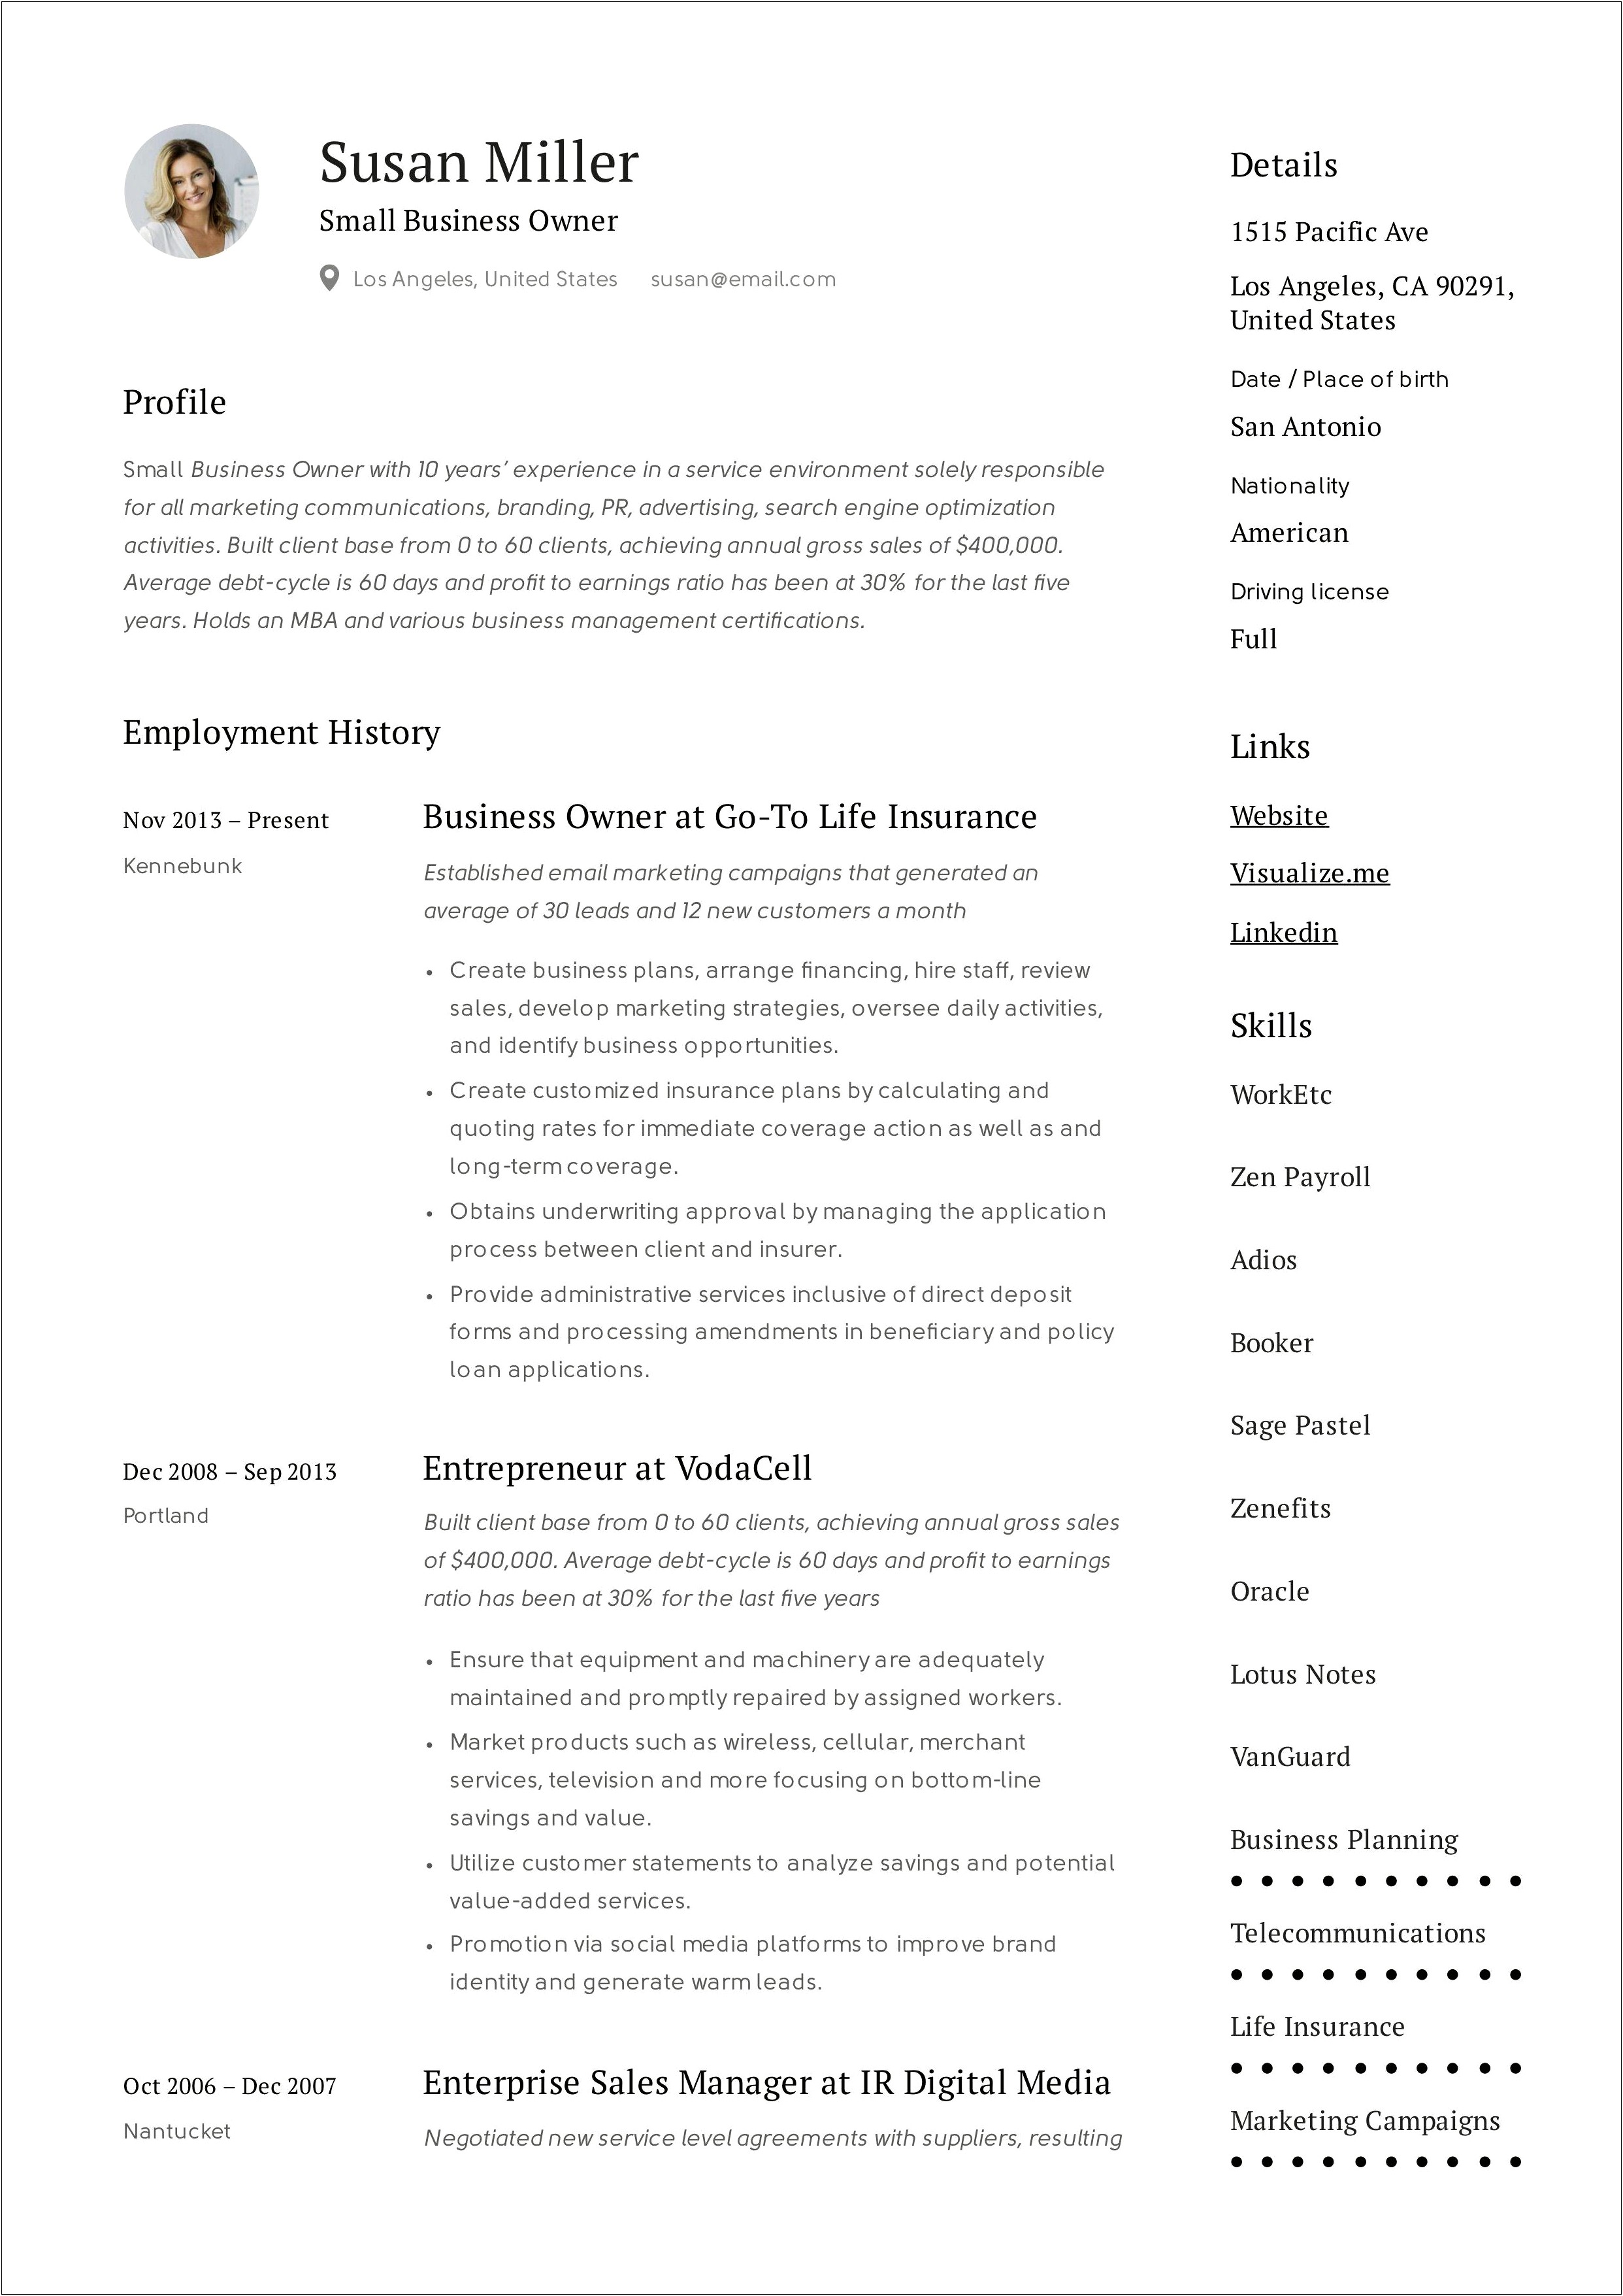 Resume Example For Small Business Application